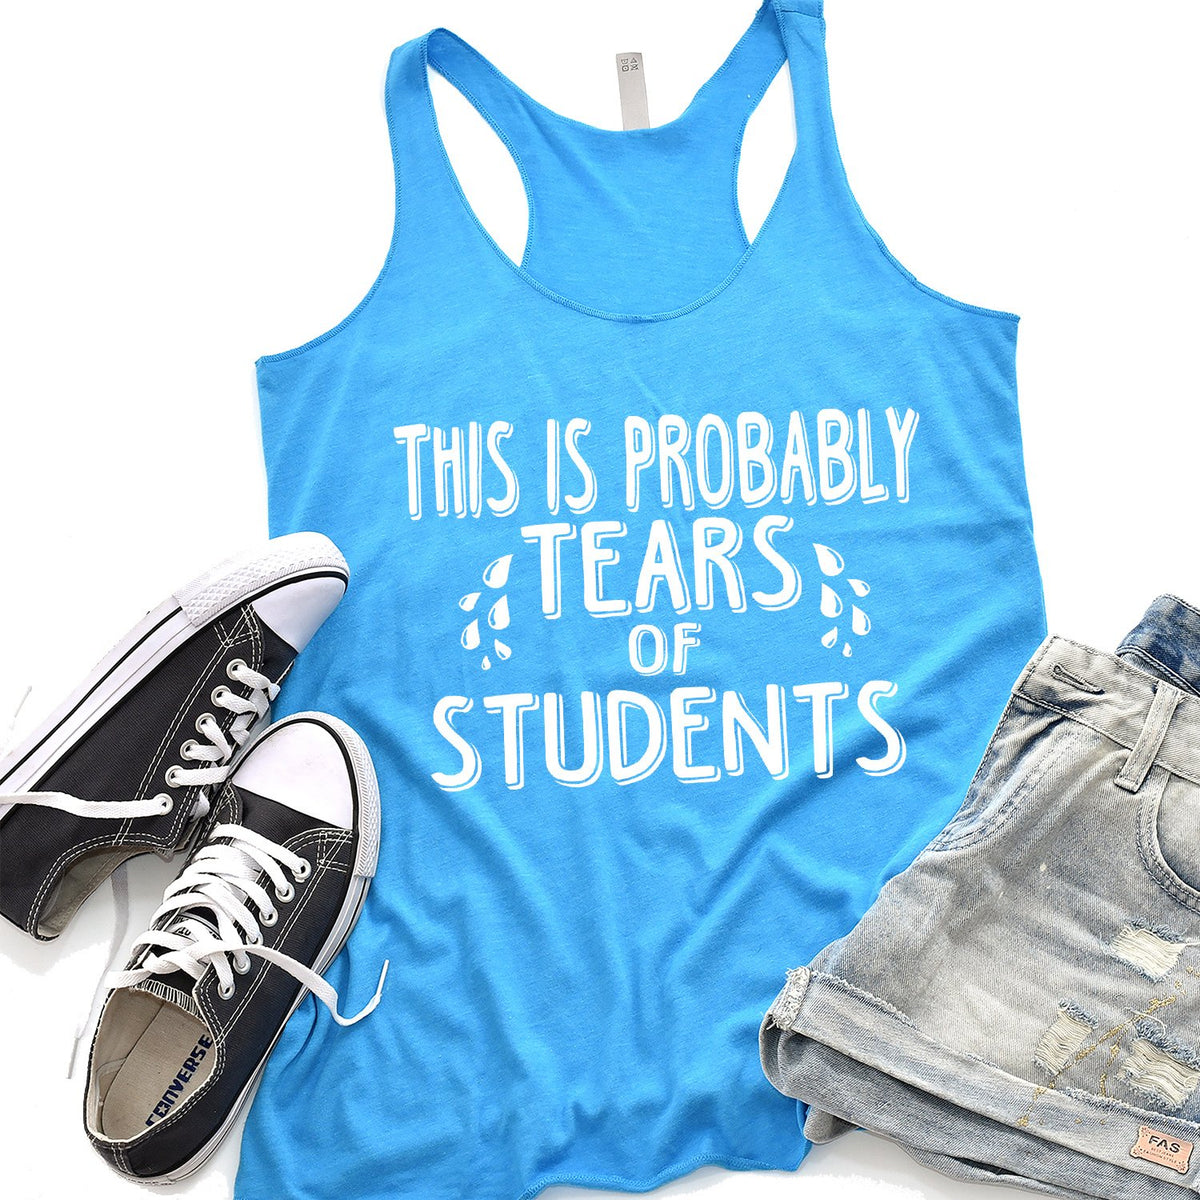 This is Probably Tears of Students - Tank Top Racerback